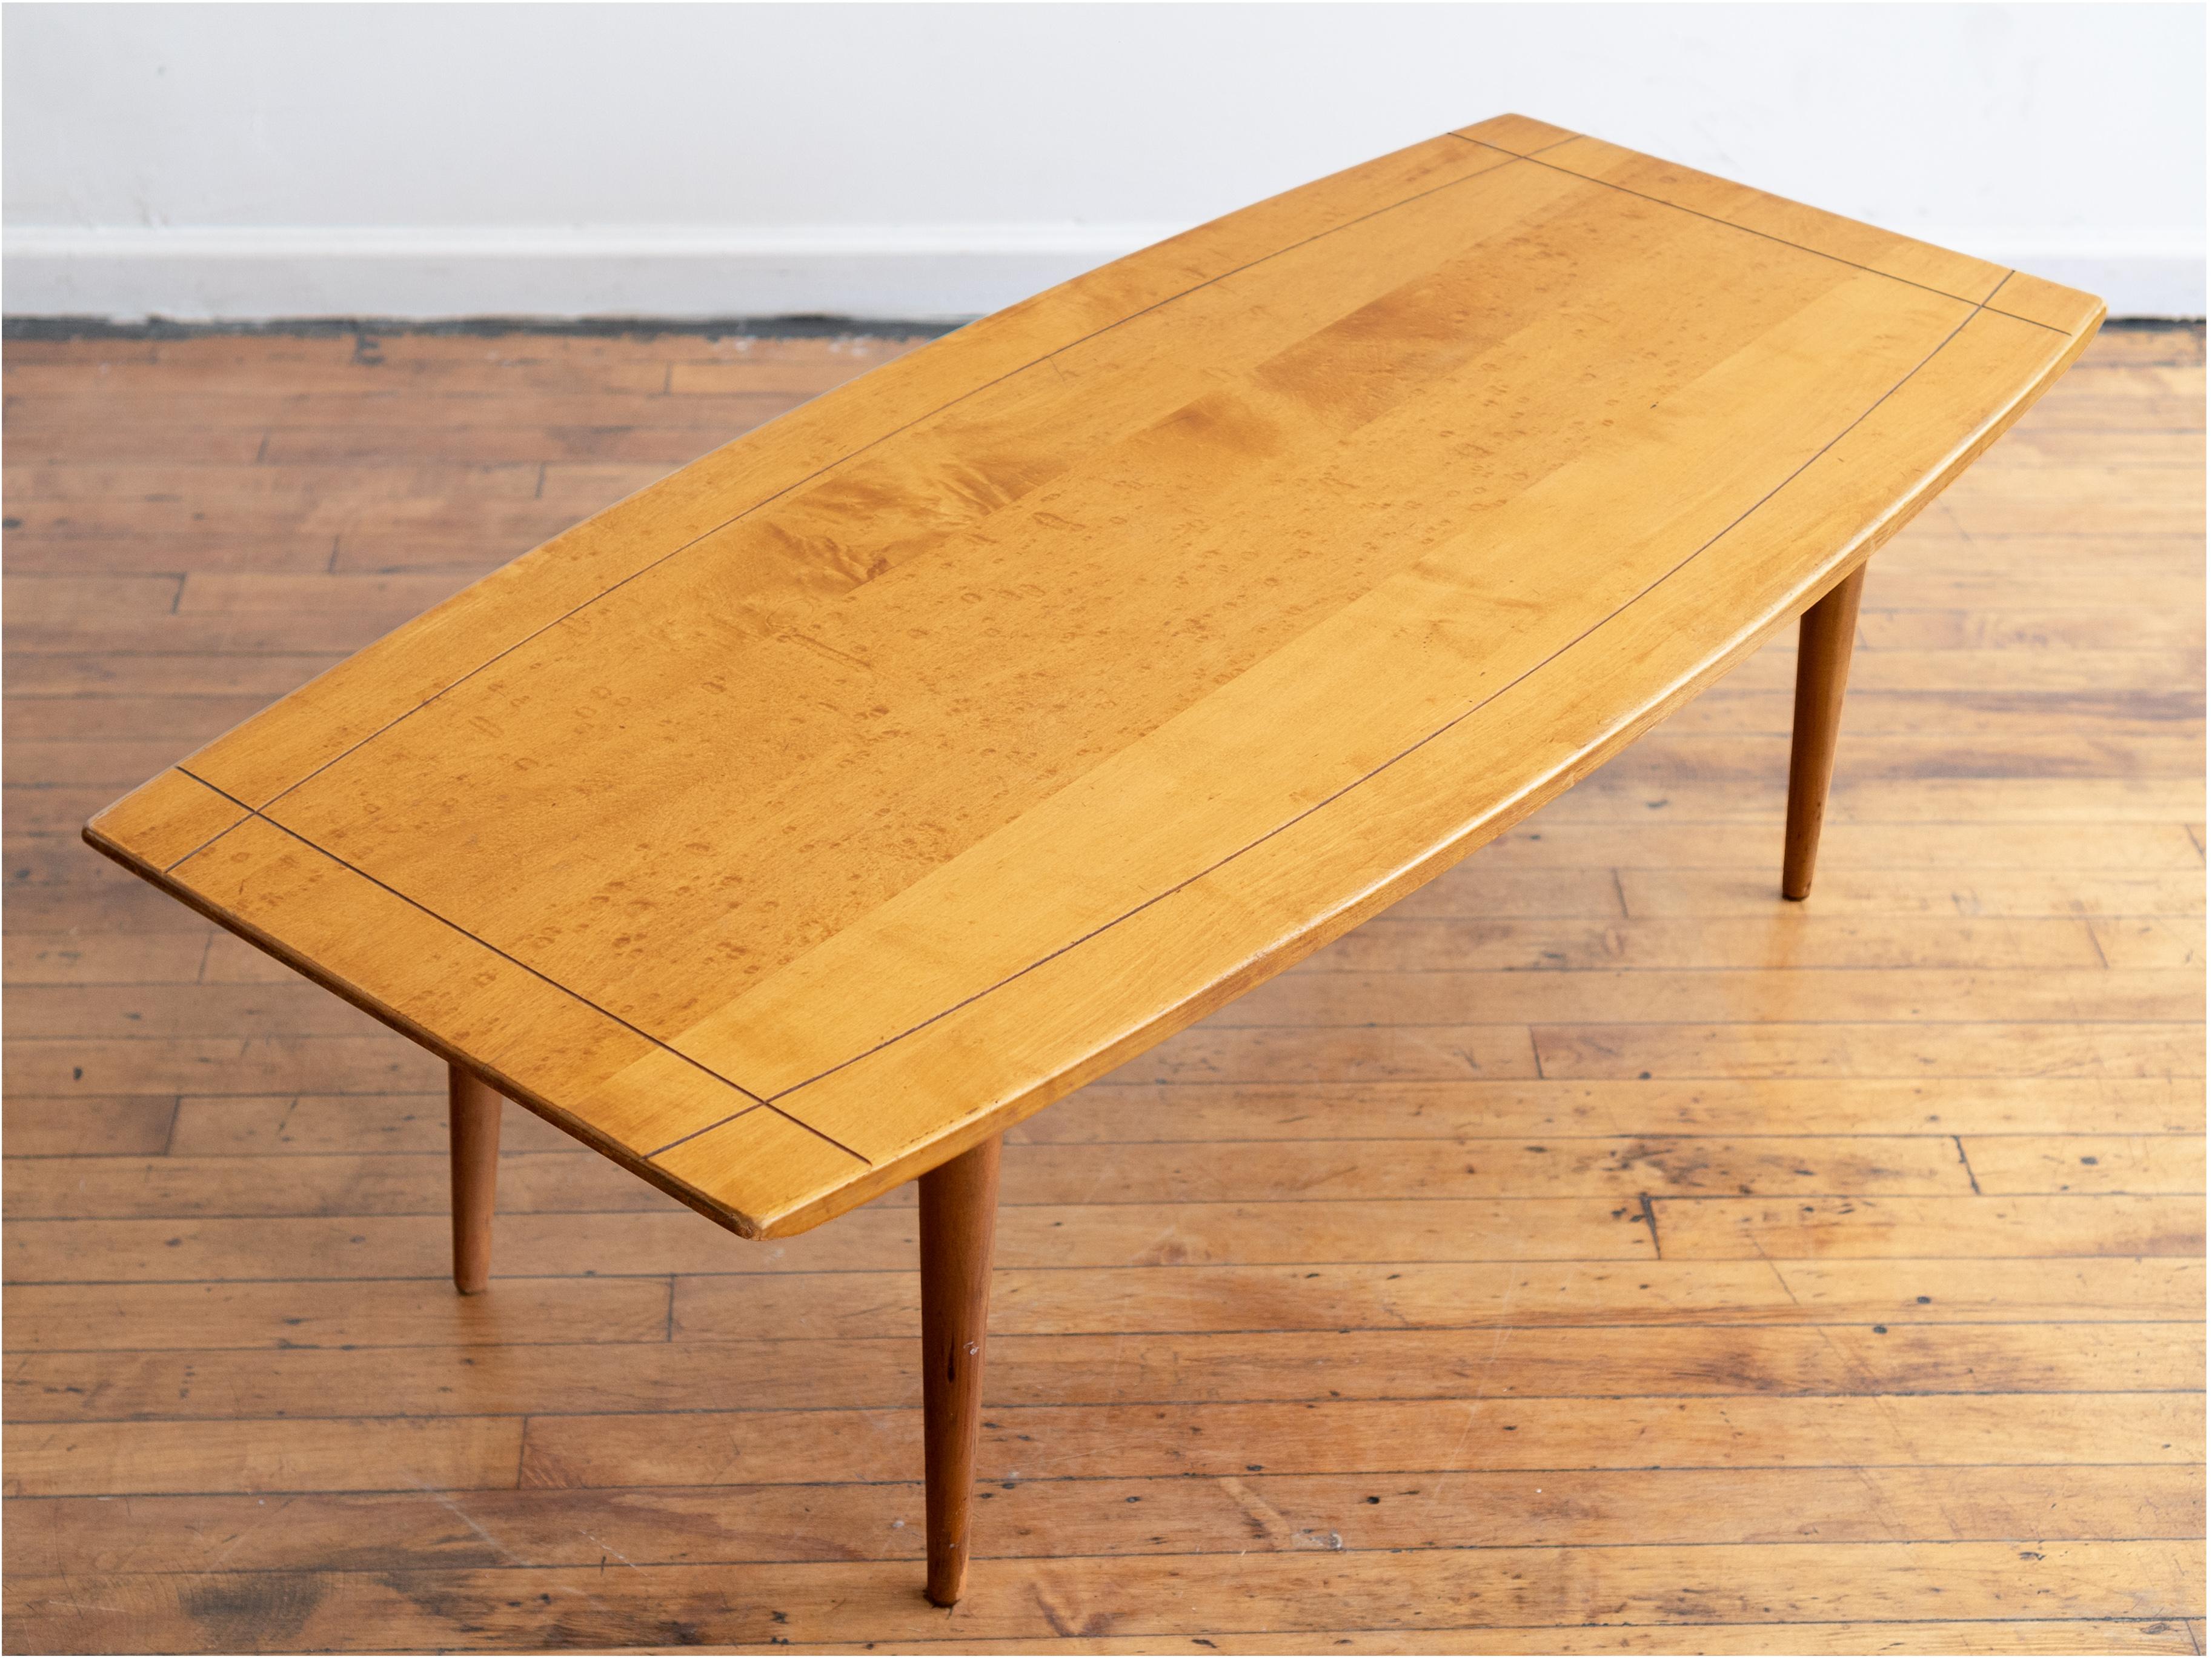 48” x 22” x 15”H  

Super cute, petite surfboard coffee table in the style of Paul McCobb's Planner Group furniture. Solid birdseye maple in a natural finish. Legs attach via hand-carved wooden threads that lock into matching sockets

Good vintage